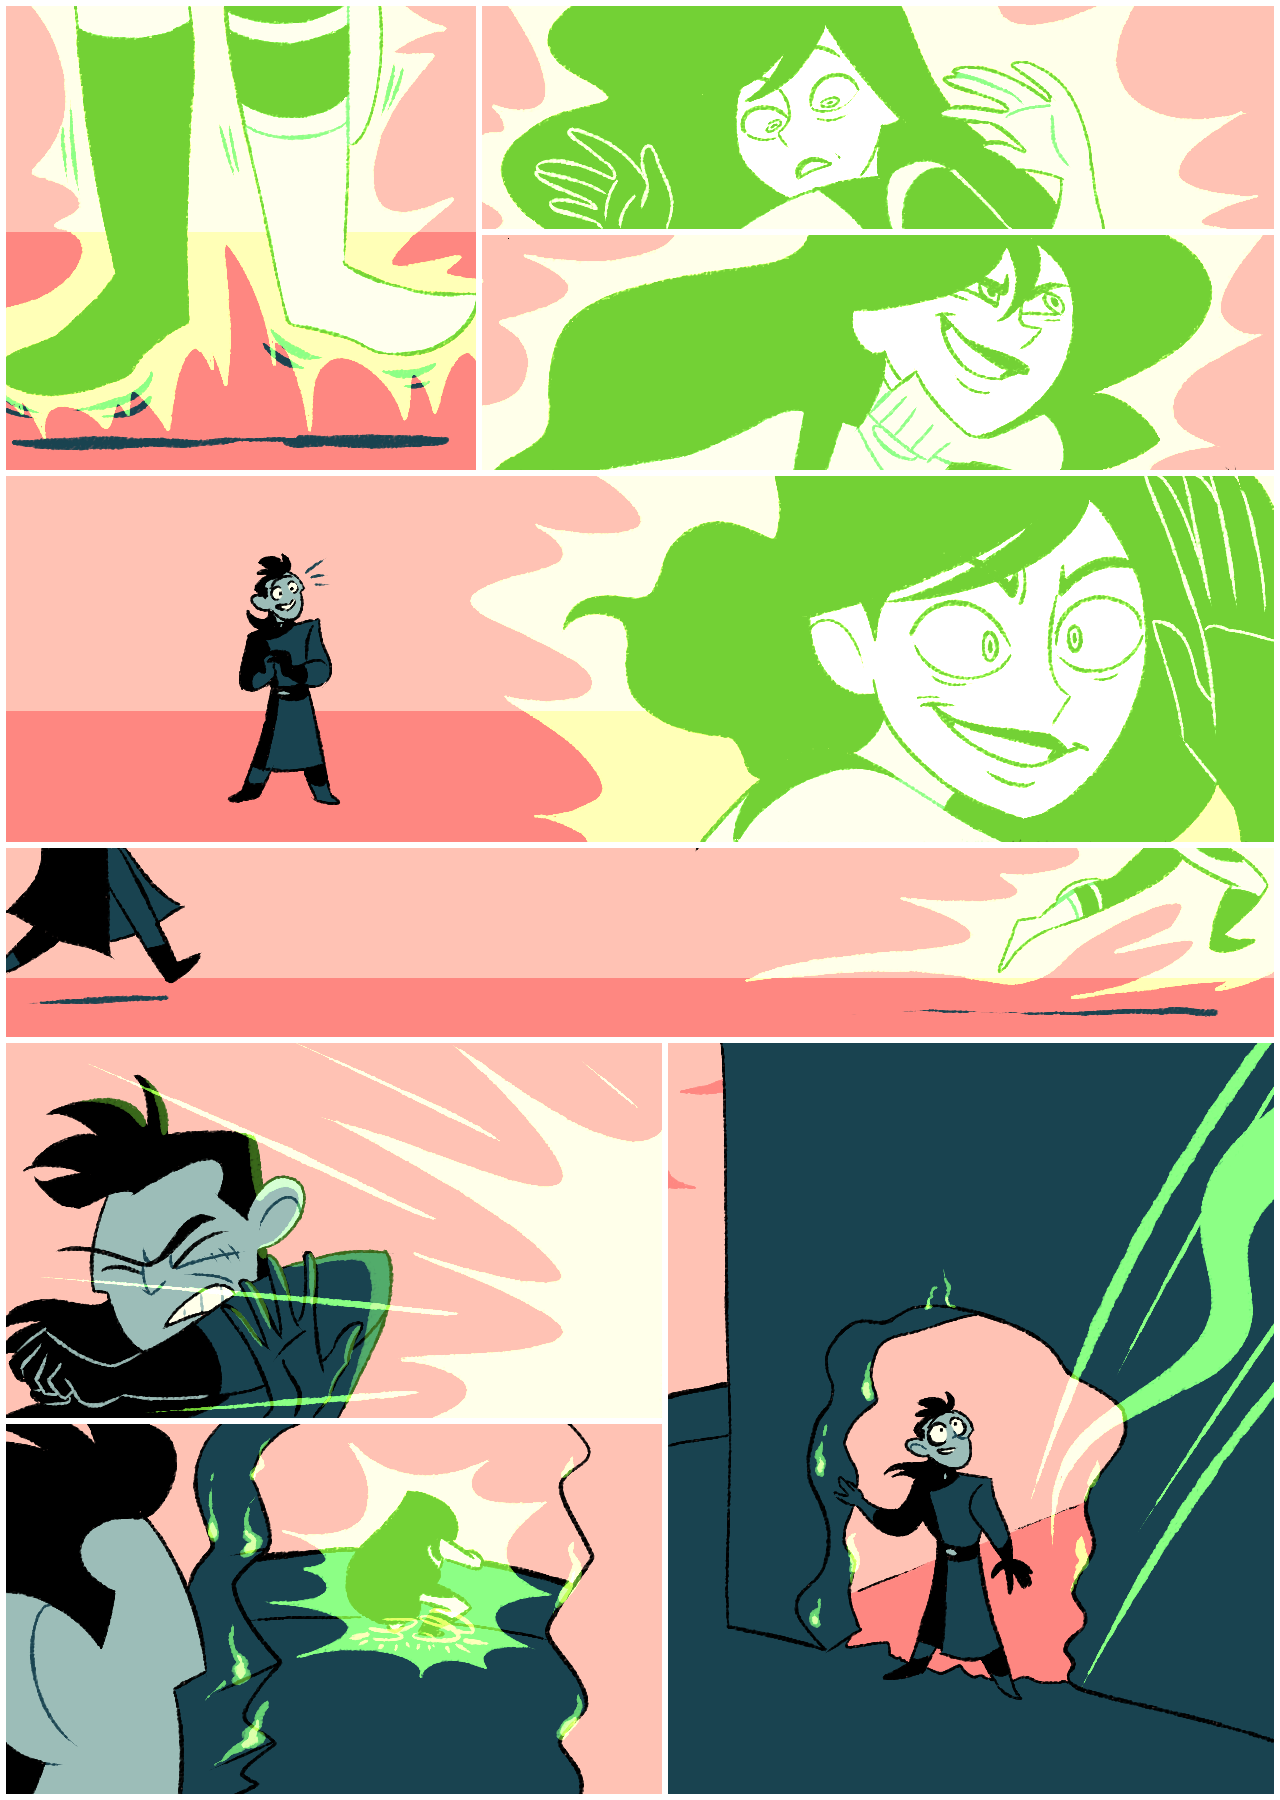 Your First Cousin Once Removed — A Kim Possible fan-comic about trust. I  recommend...